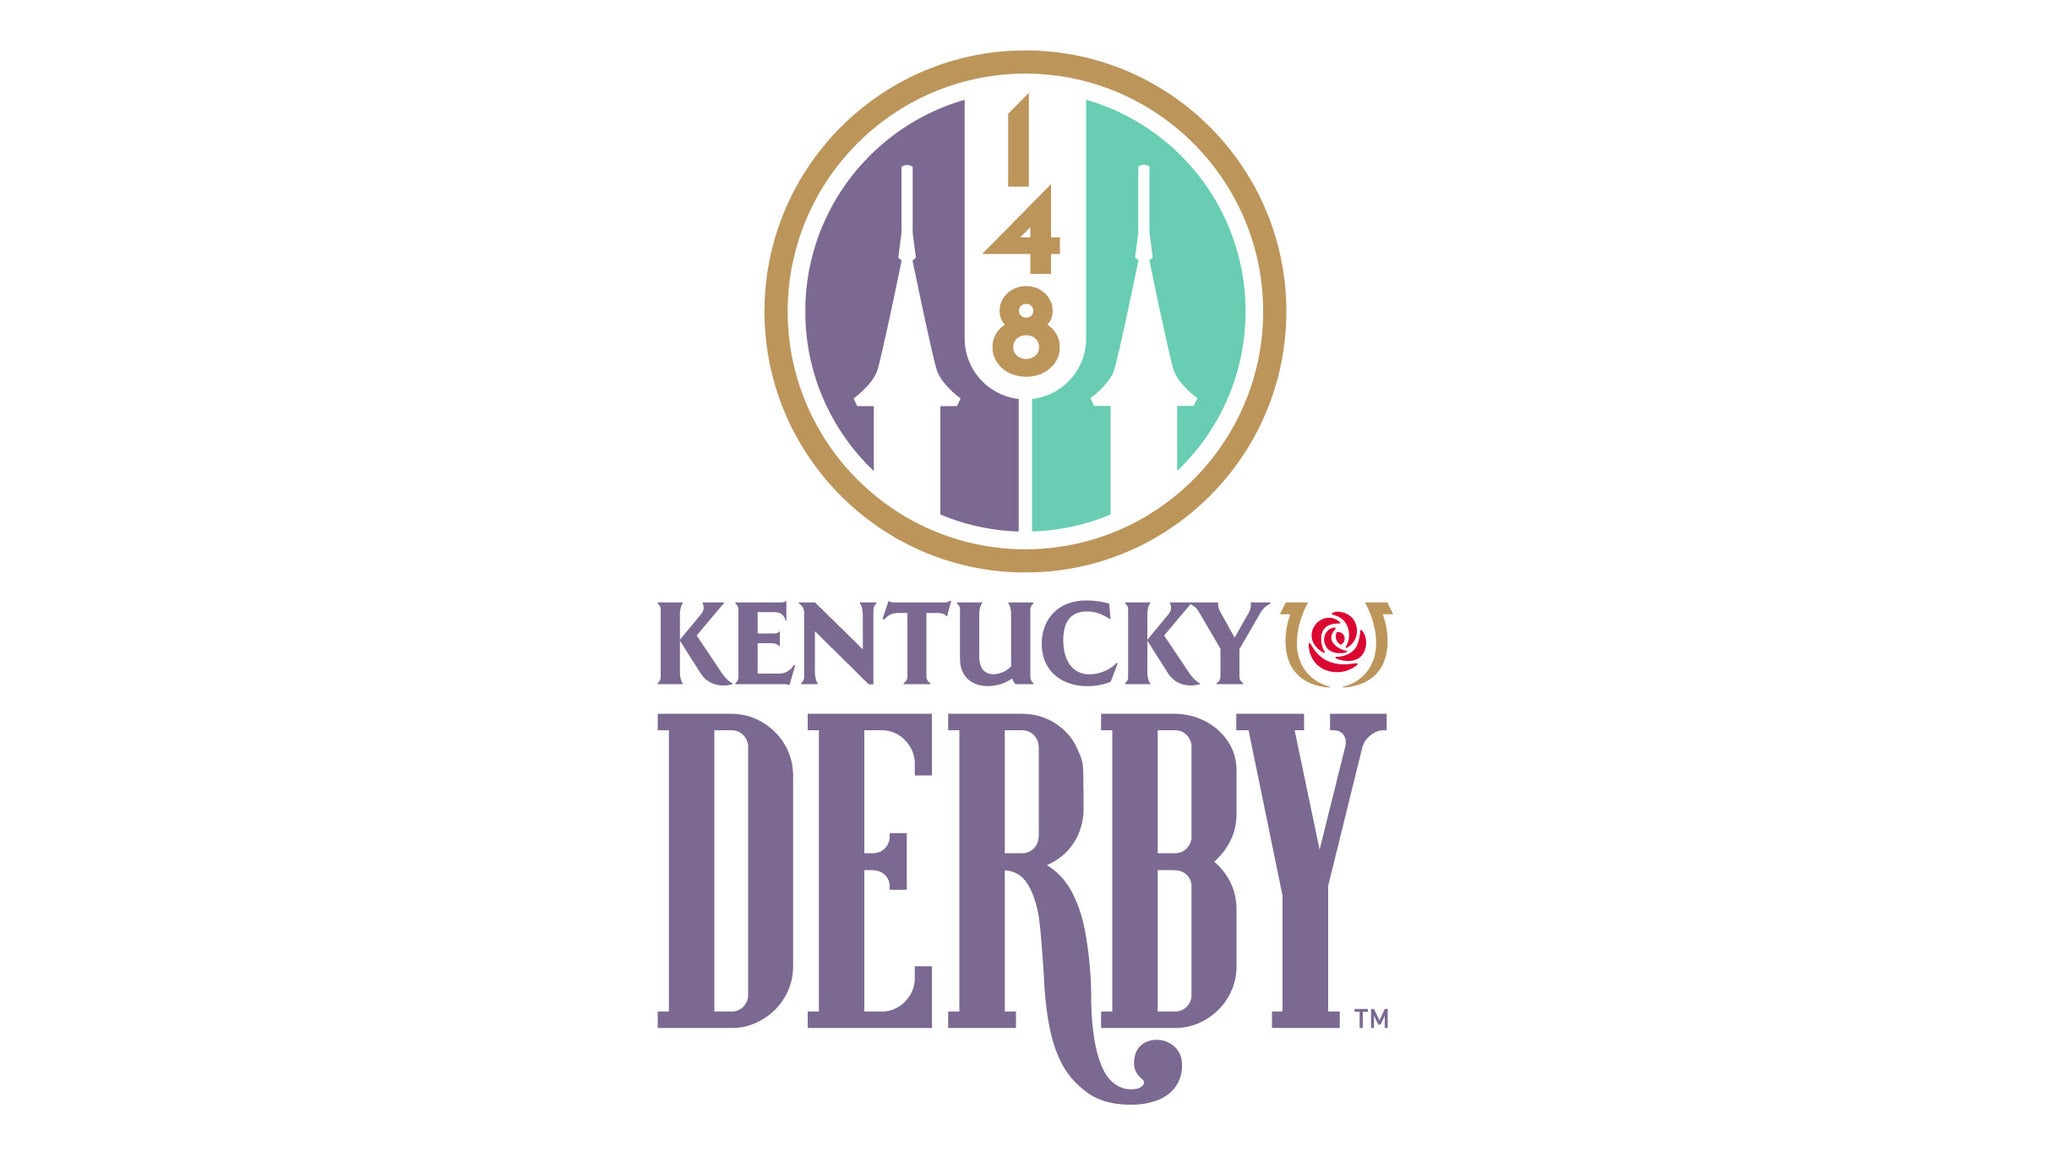 148th Kentucky Derby - Infield General Admission *No Front Side Access in Louisville promo photo for Standard Purchase Pricing presale offer code